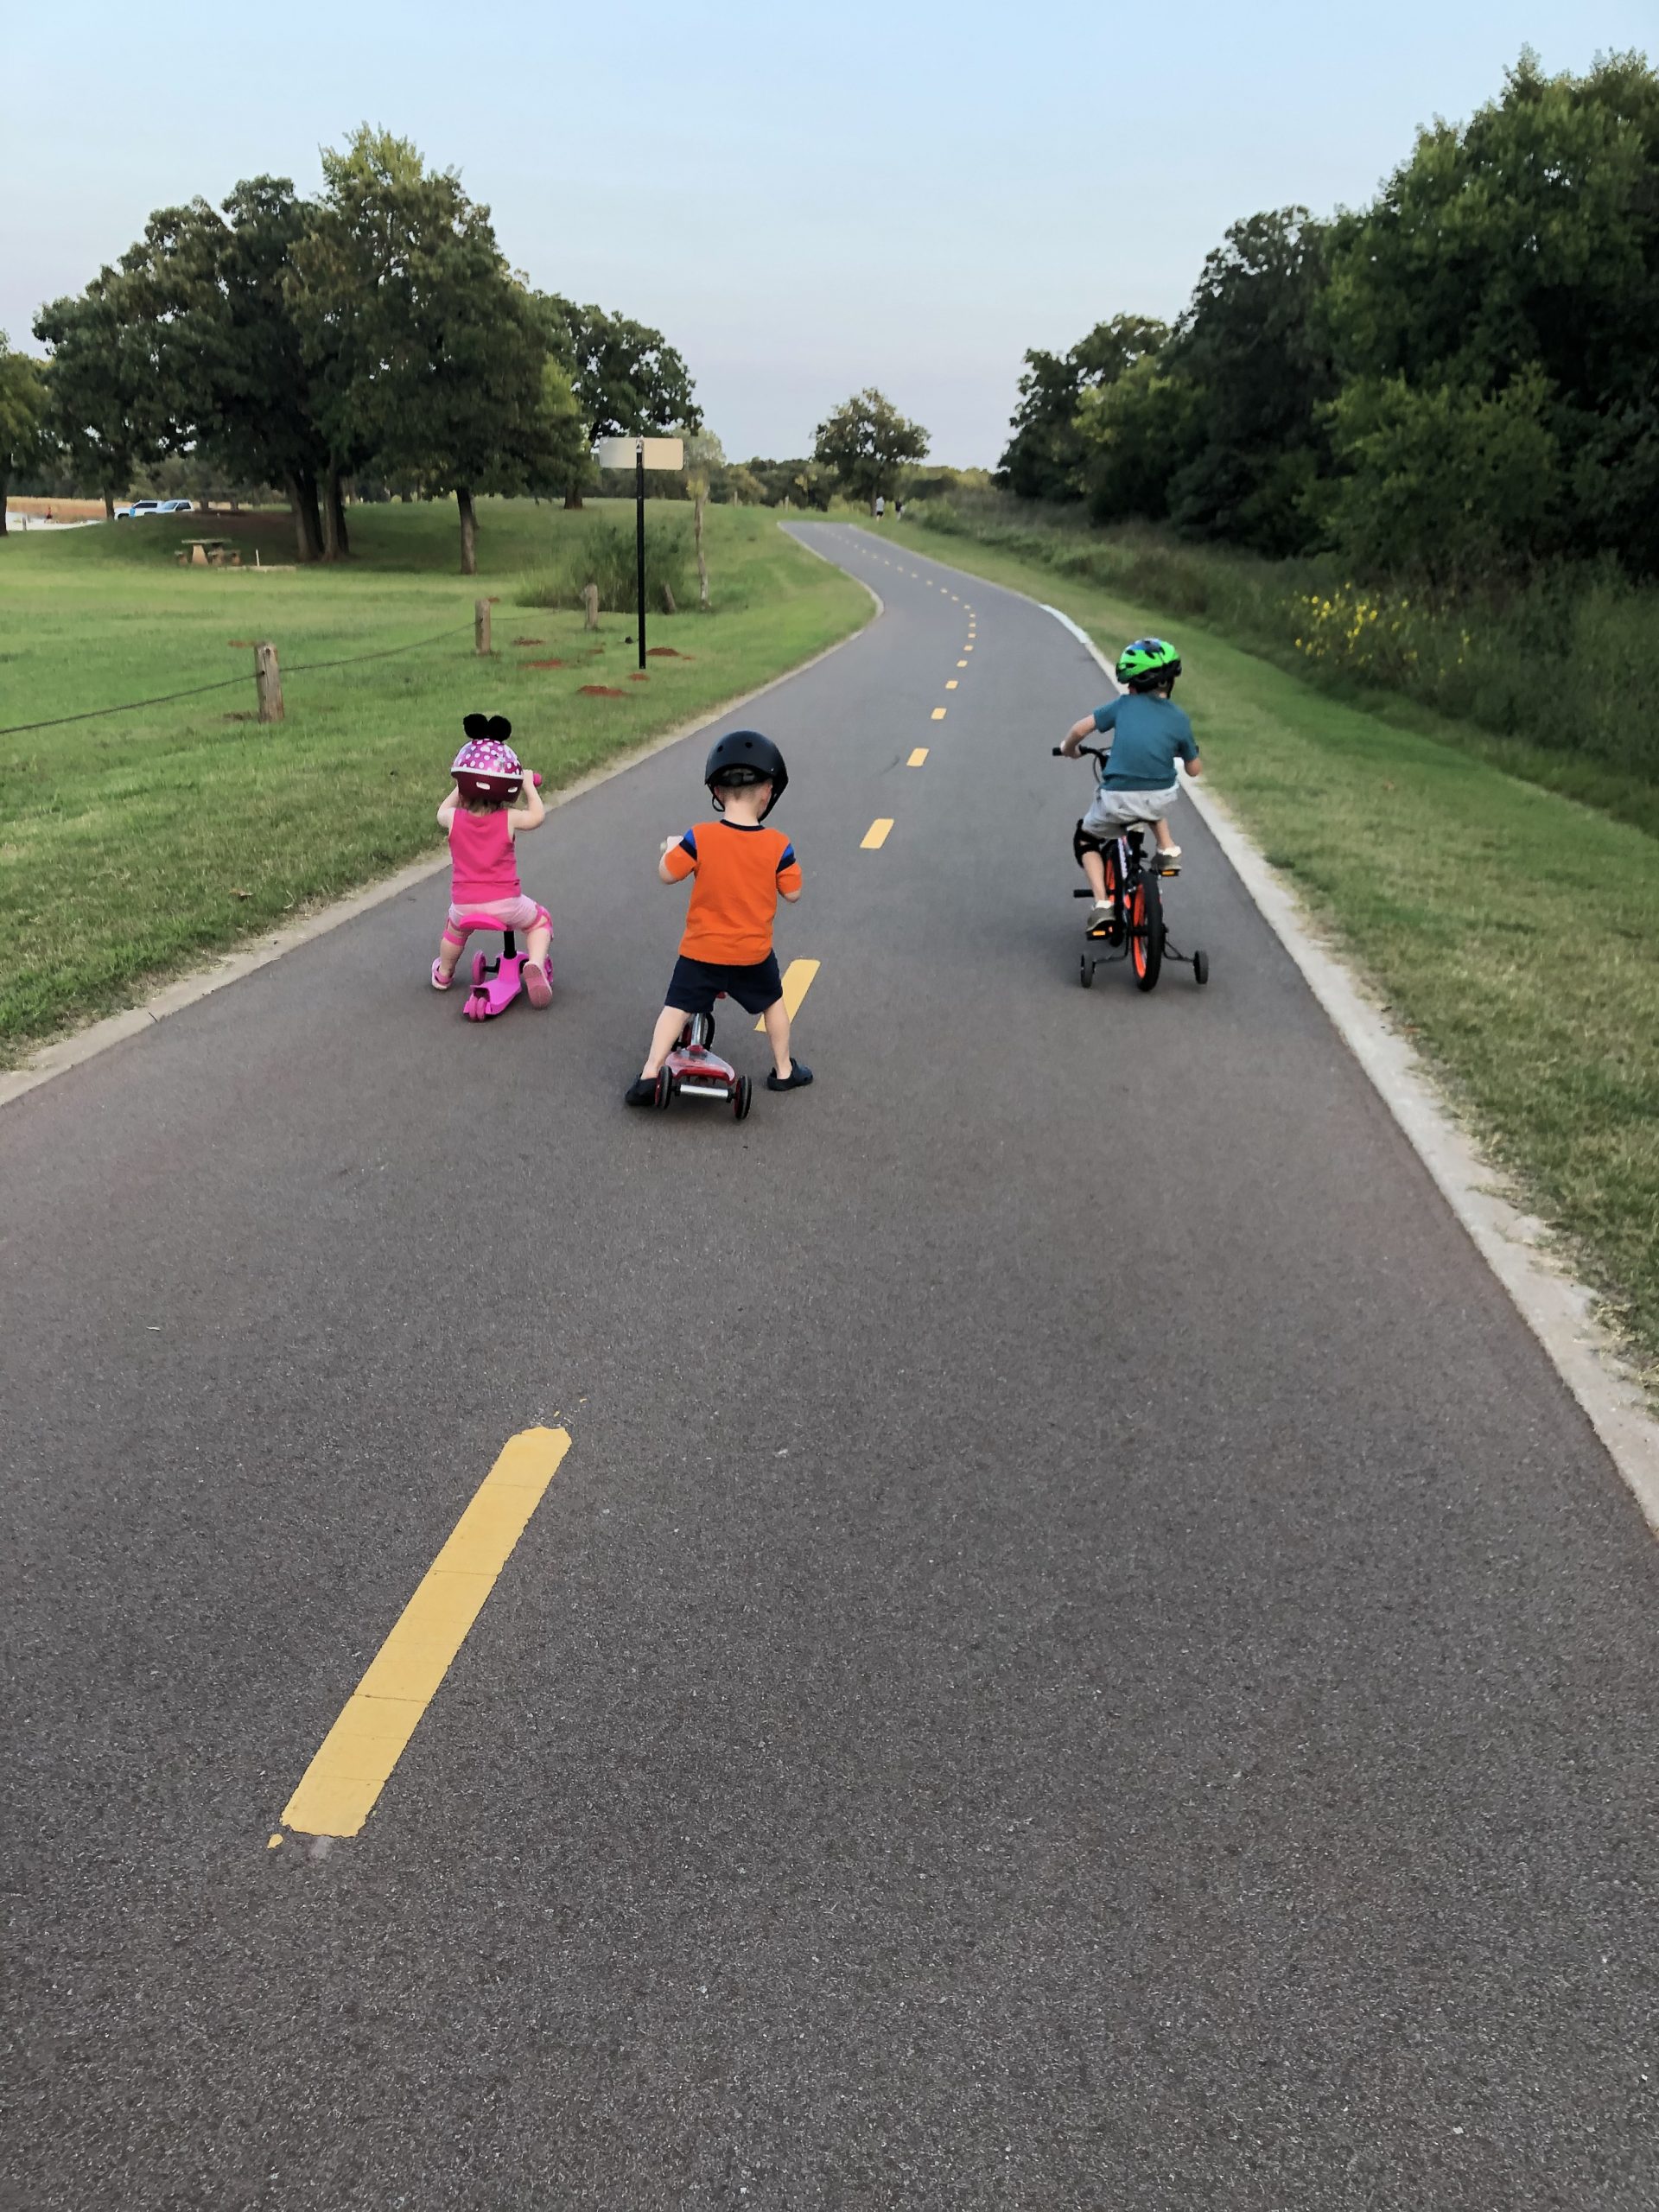 My Three Kids On Scooters At The Park